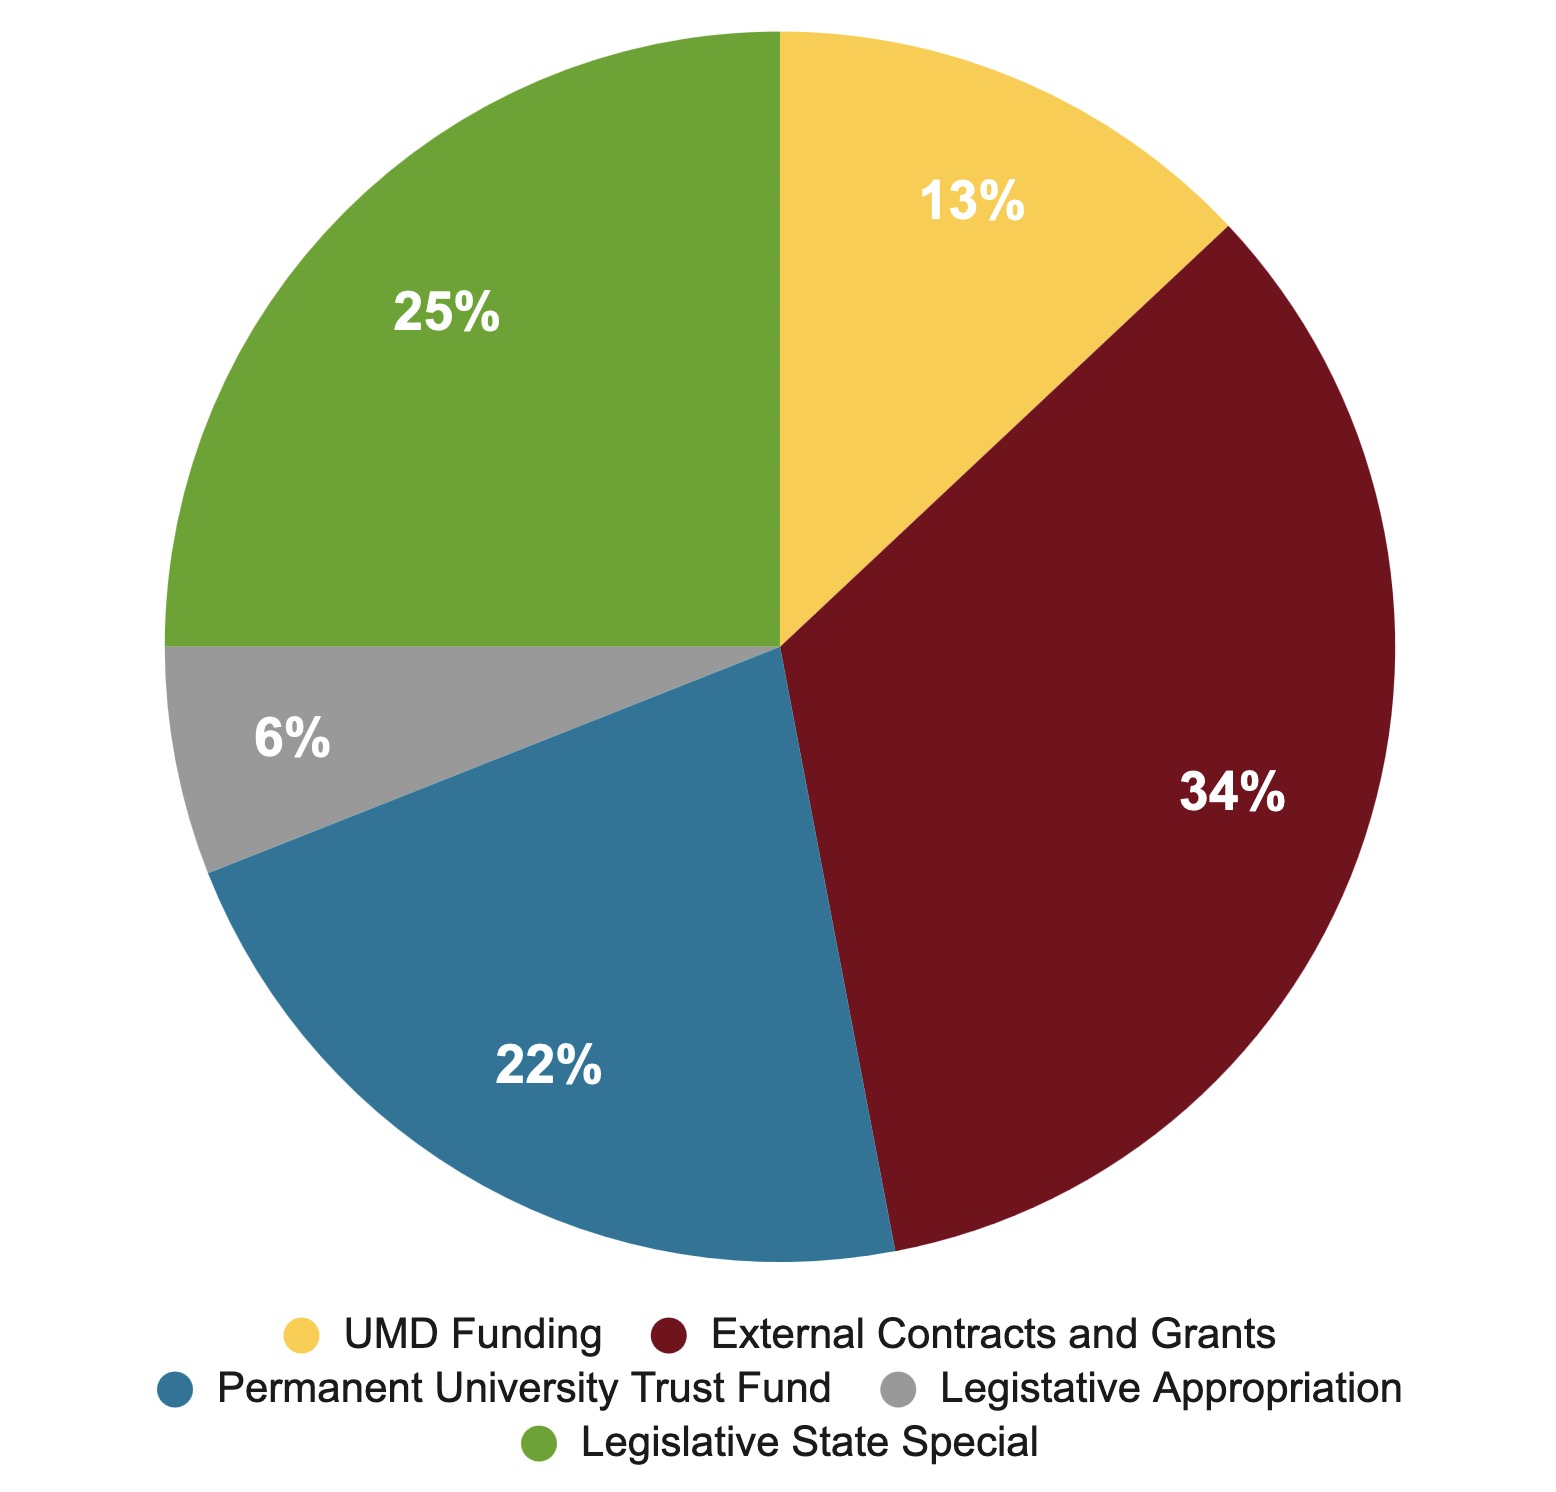 2023 Operating Budget pie chart: 6% Legislative Appropriation, 13% UMD Funding, 22% Permanent University Trust Fund, 25% Legislative State Special, and 34% External Contrats and Grants